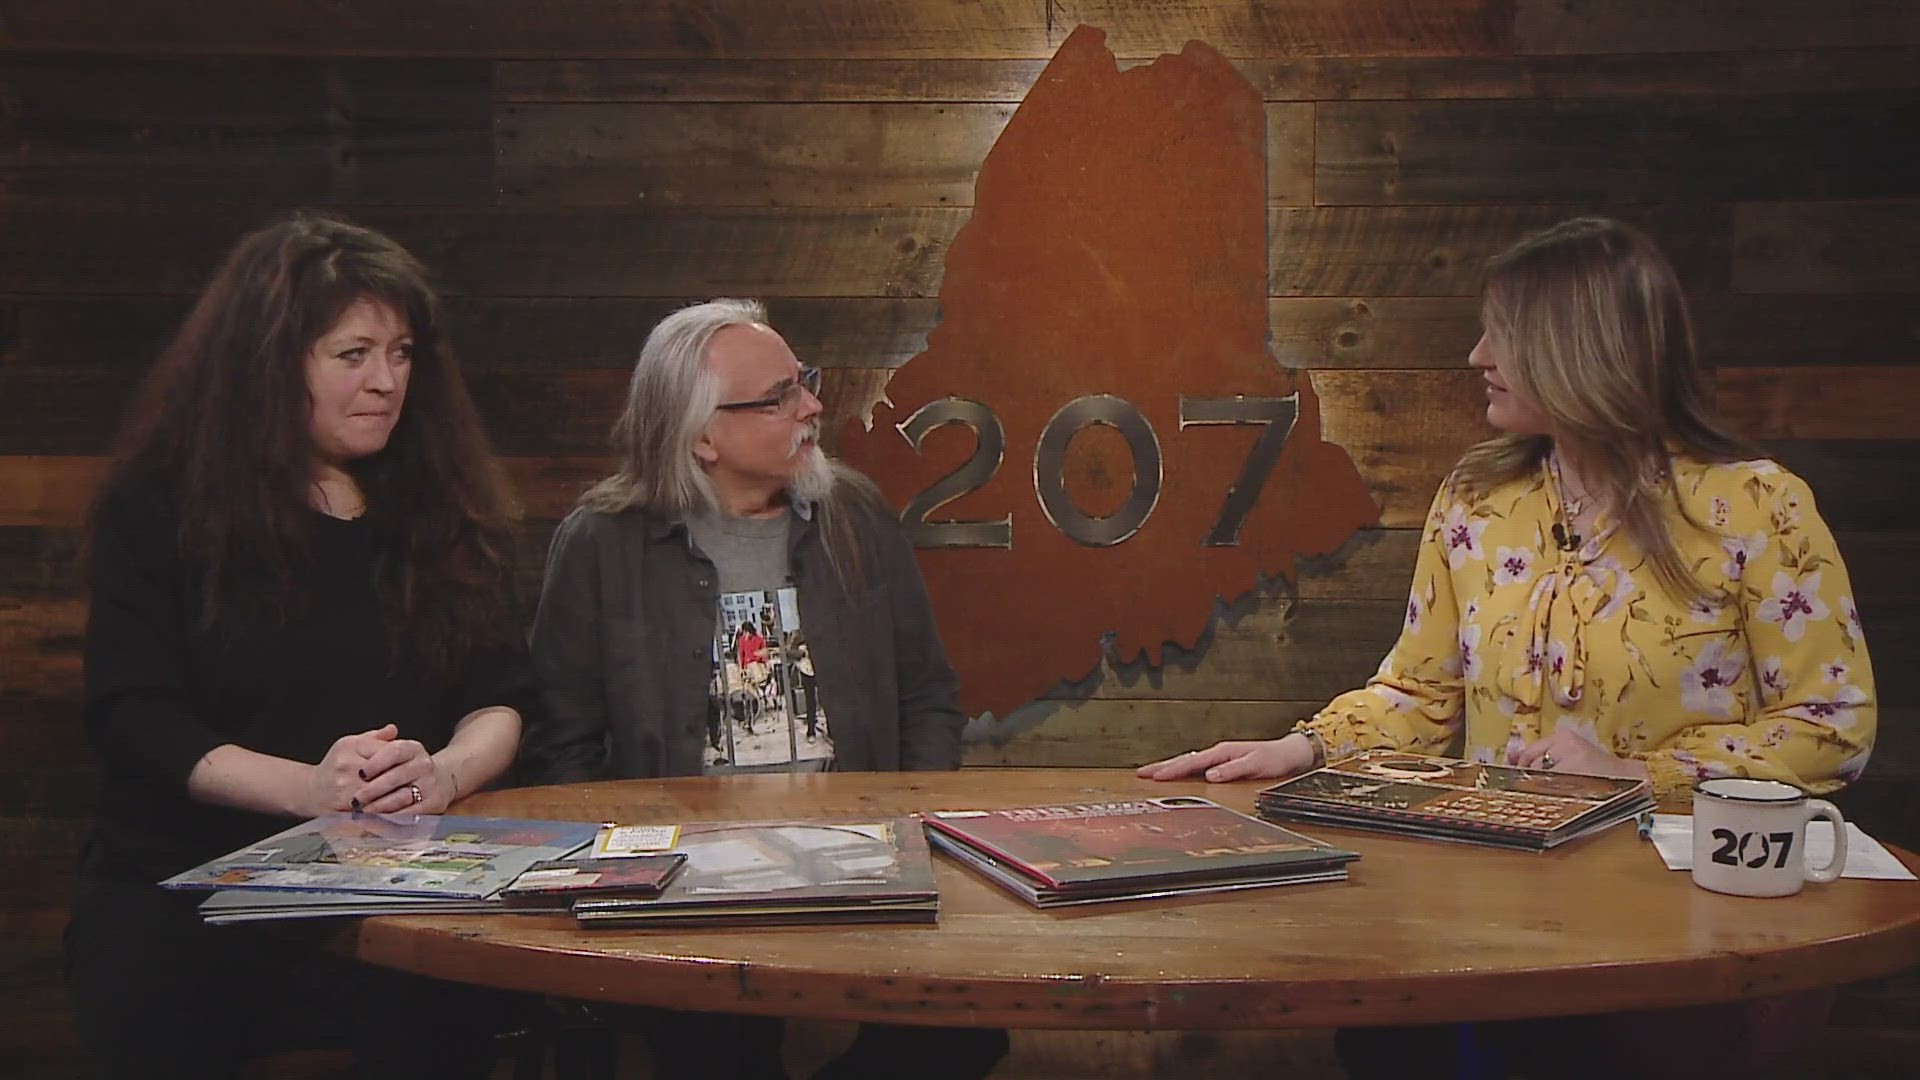 The folks from Bull Moose stopped by the 207 studio to share a snapshot of this year's vinyl selection.